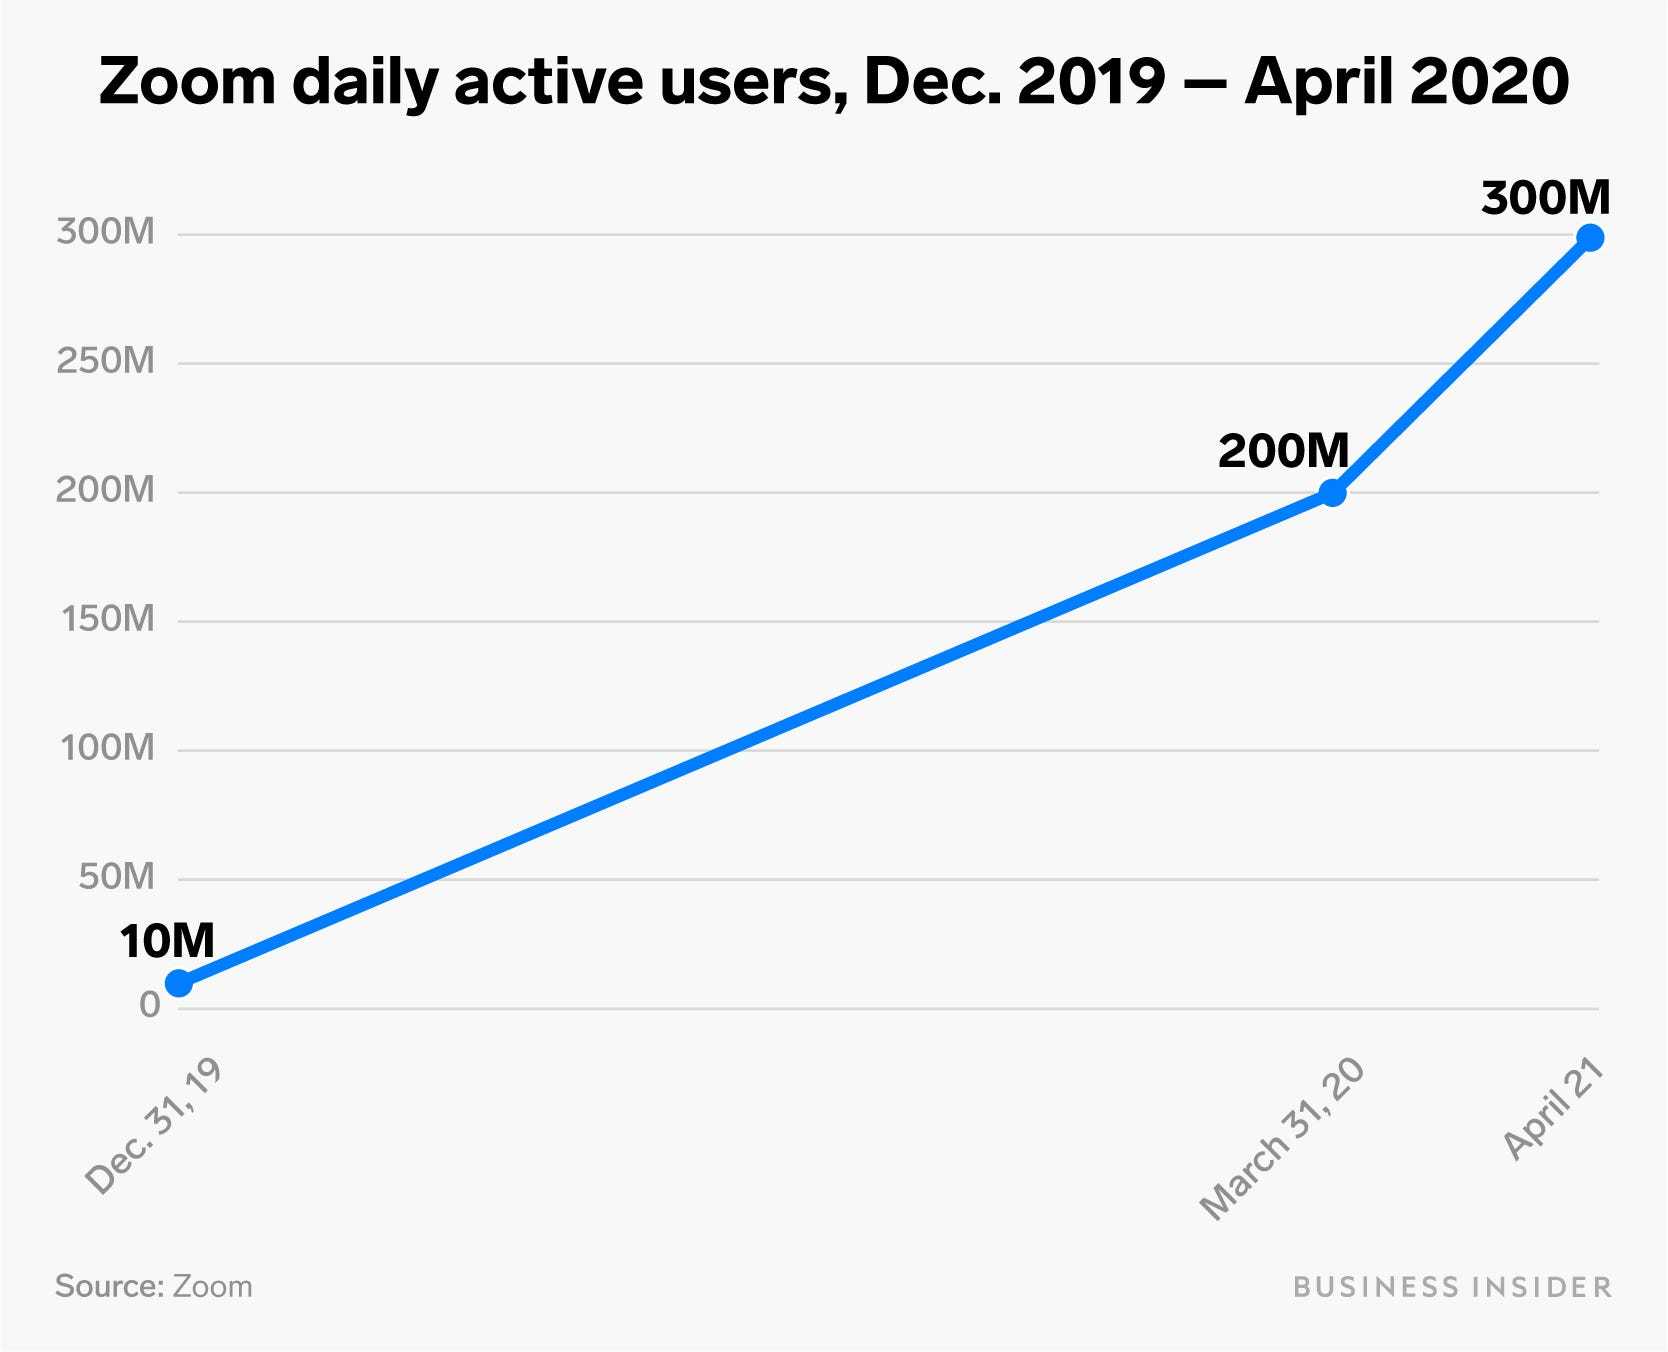 Zoom daily active users